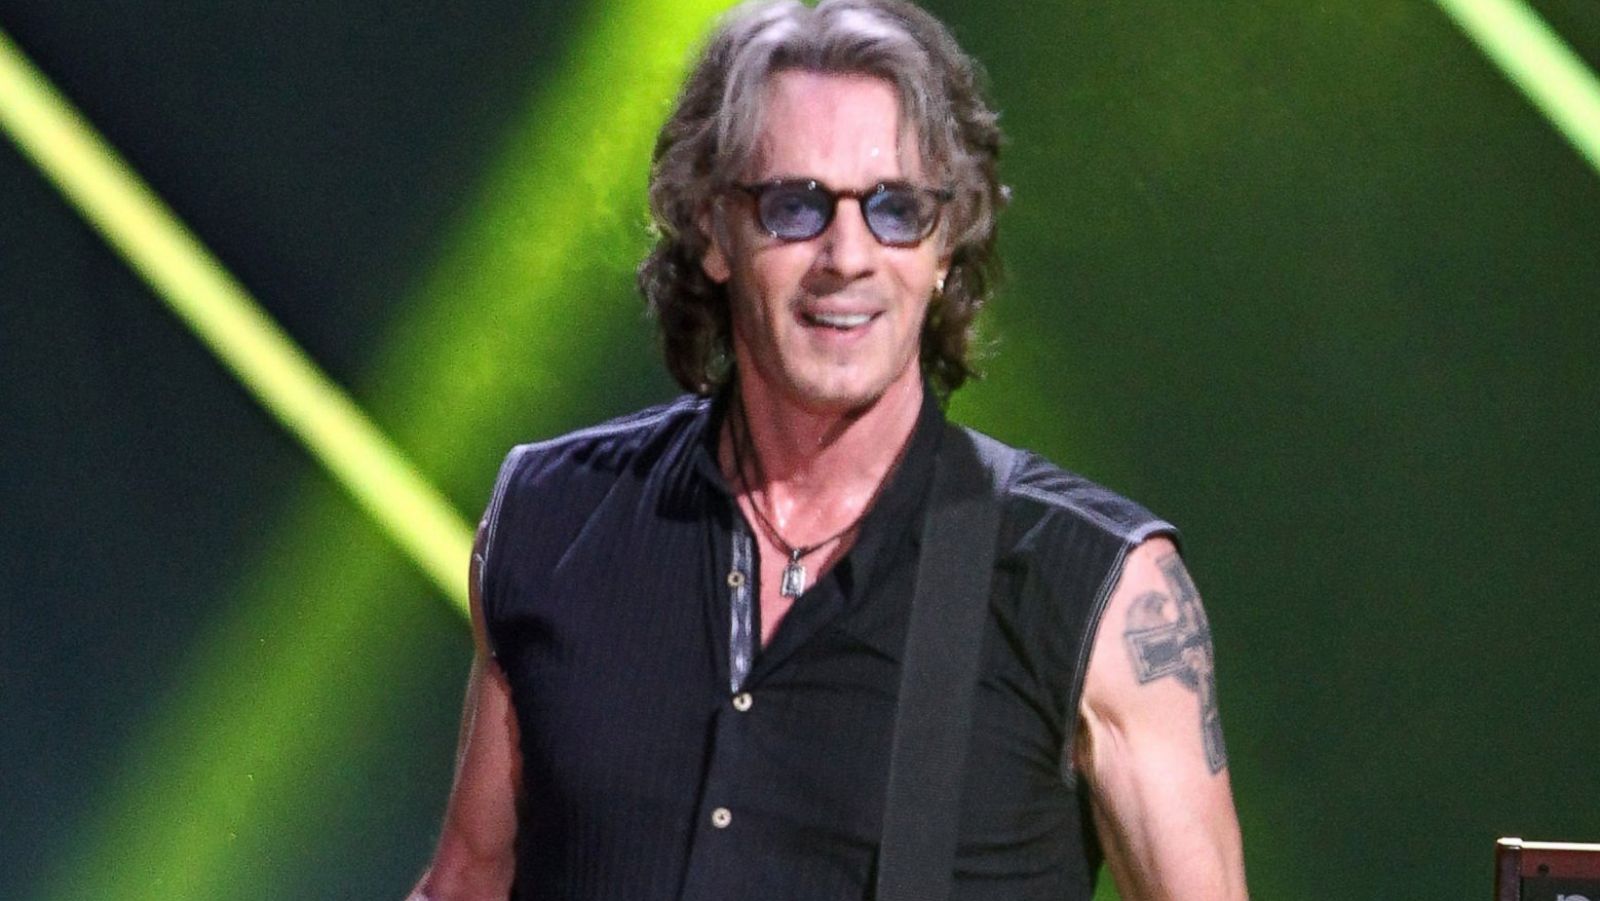 Rick Springfield's New Album Represents 'Another Side of His Eclectic Music Career'